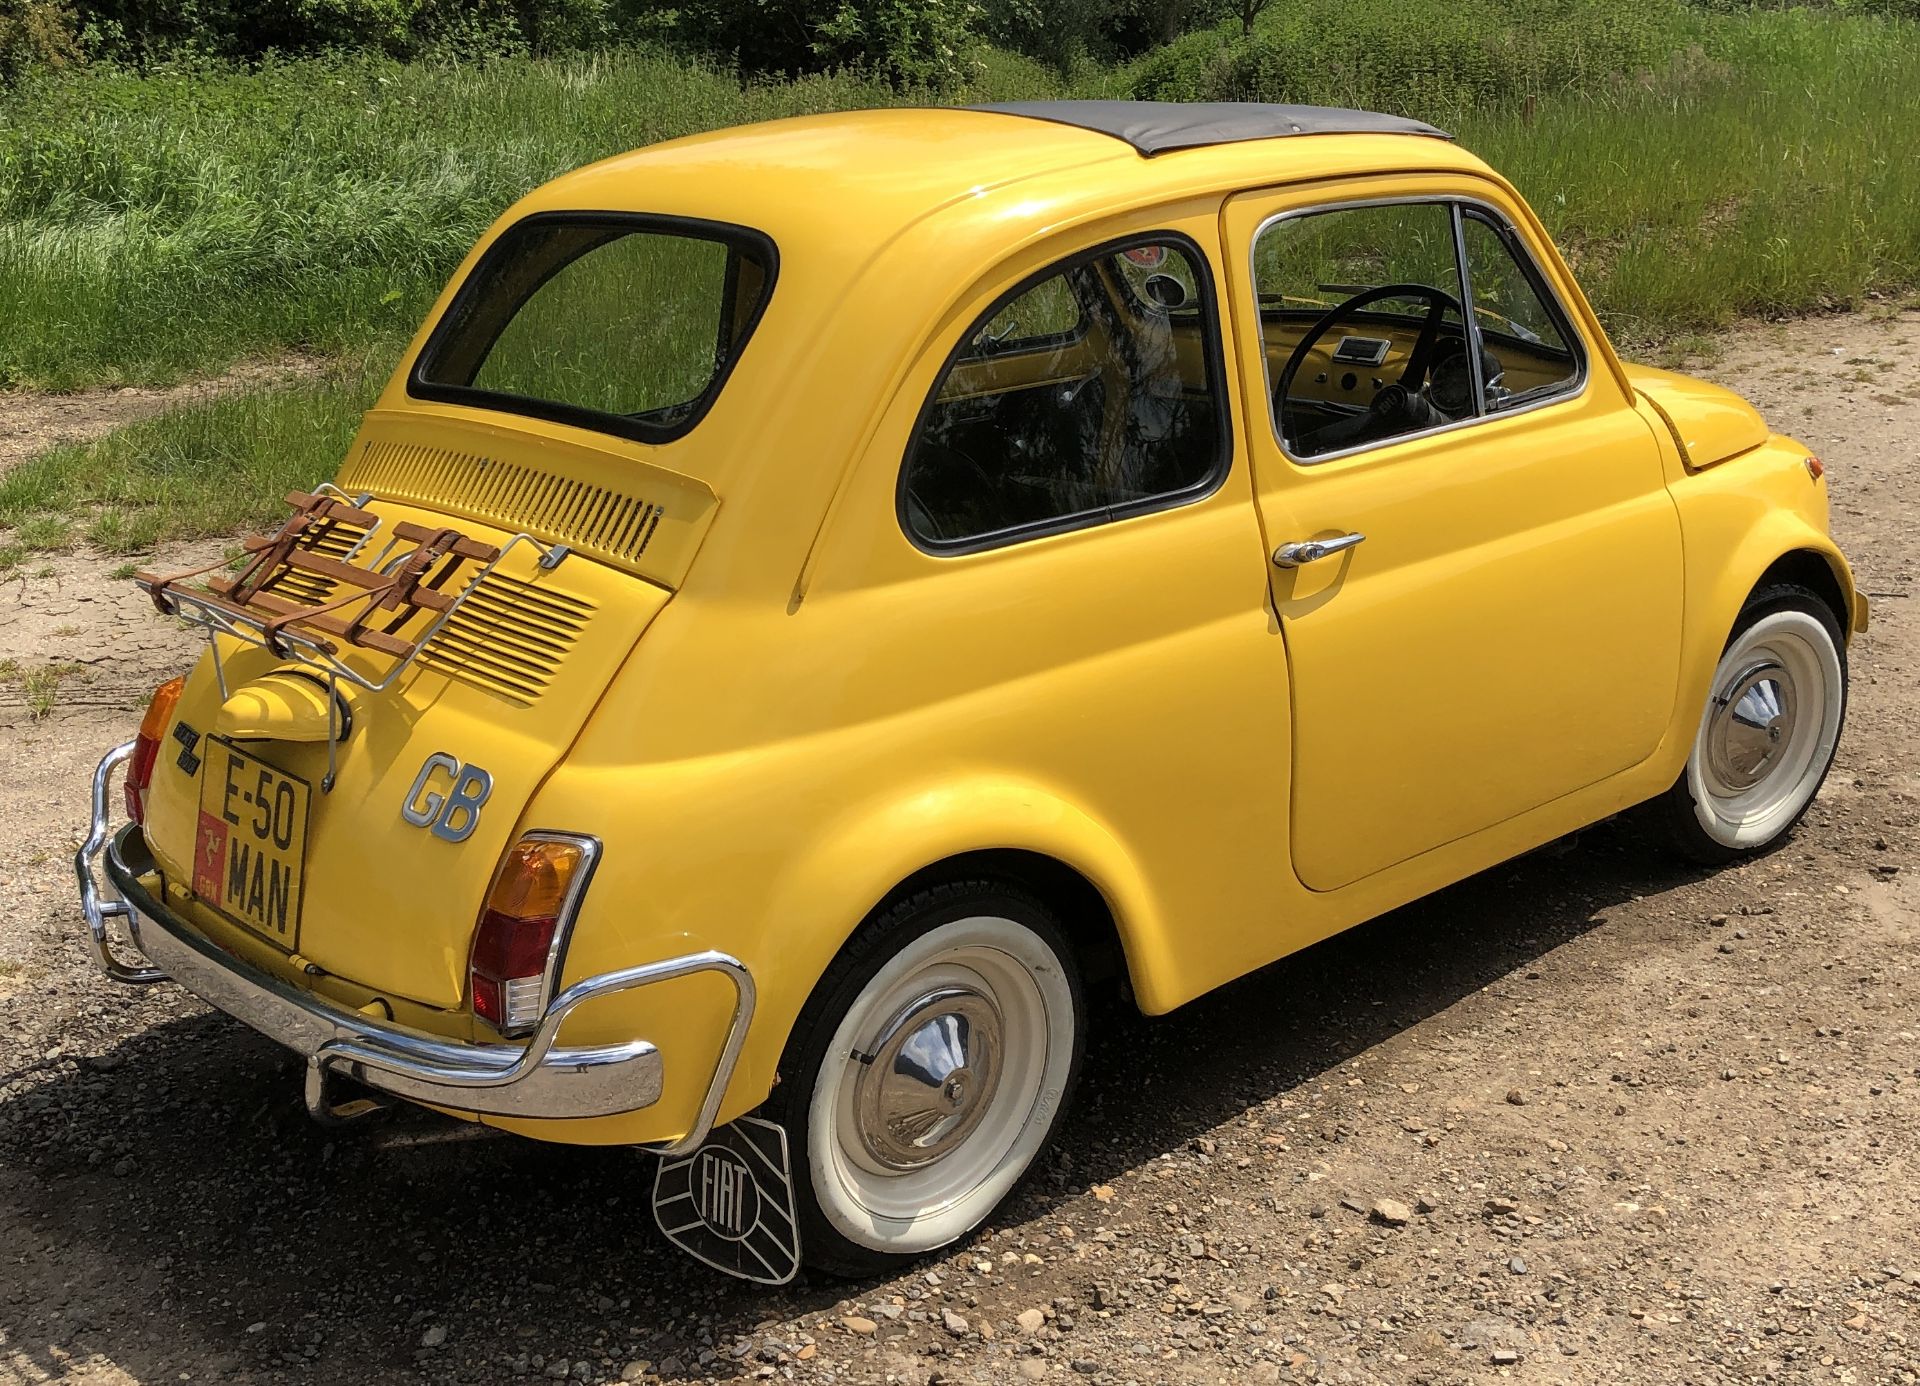 1972 Fiat 500 Saloon, Registration E-50-Man (IOM, Formally Registered as TGF 249L), First Registered - Image 5 of 34